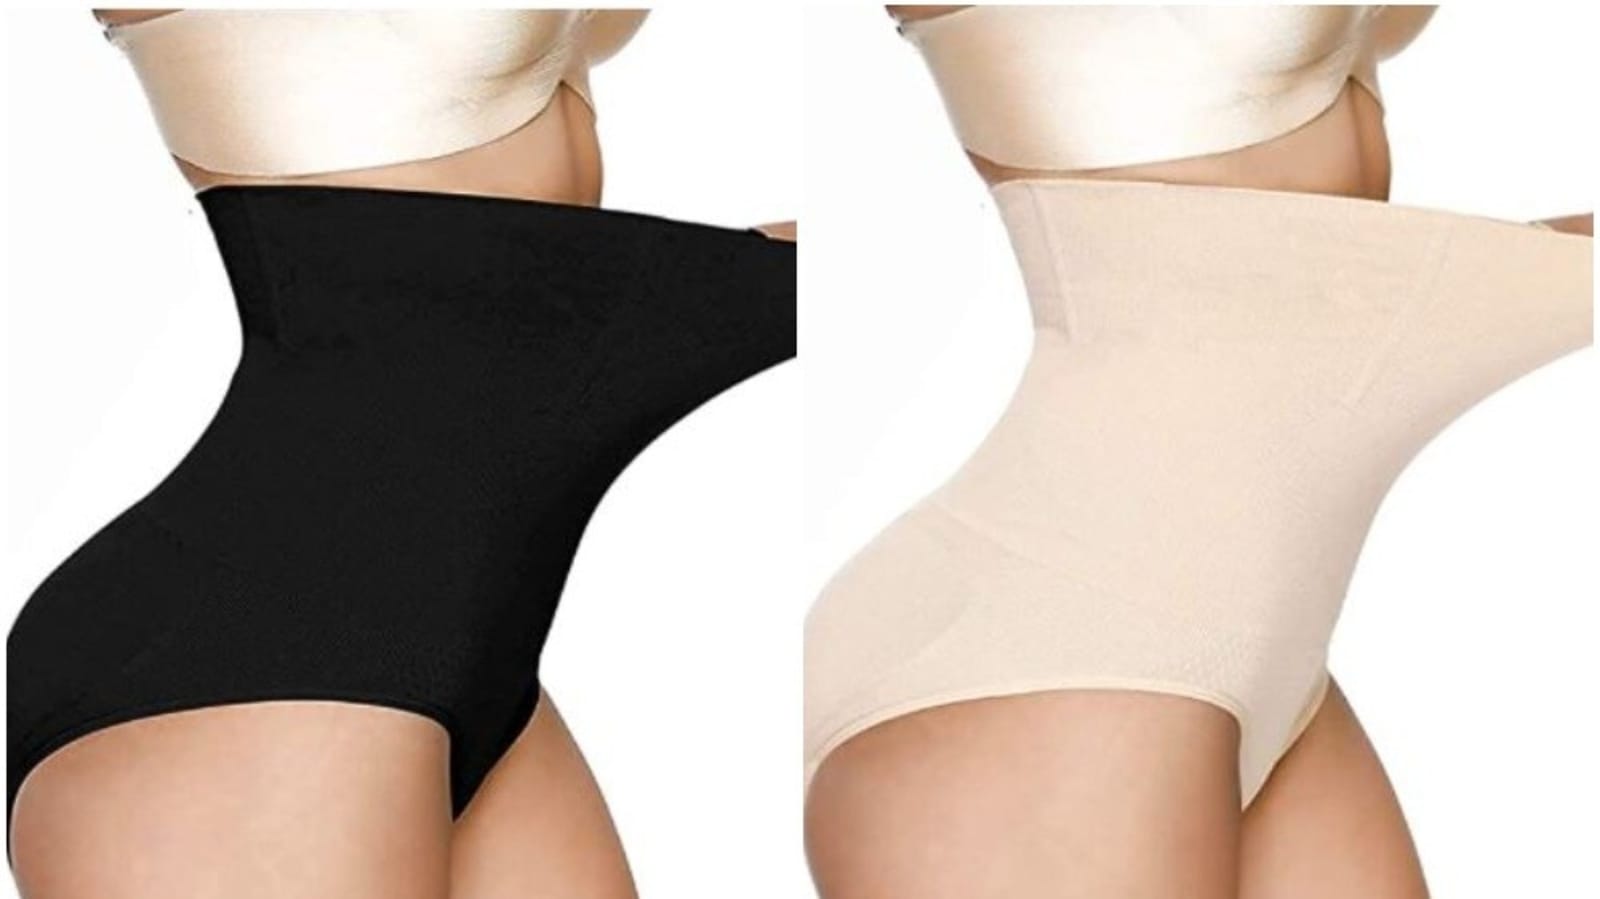 Struggling with belly fat? Let high waist shapewear come to your rescue